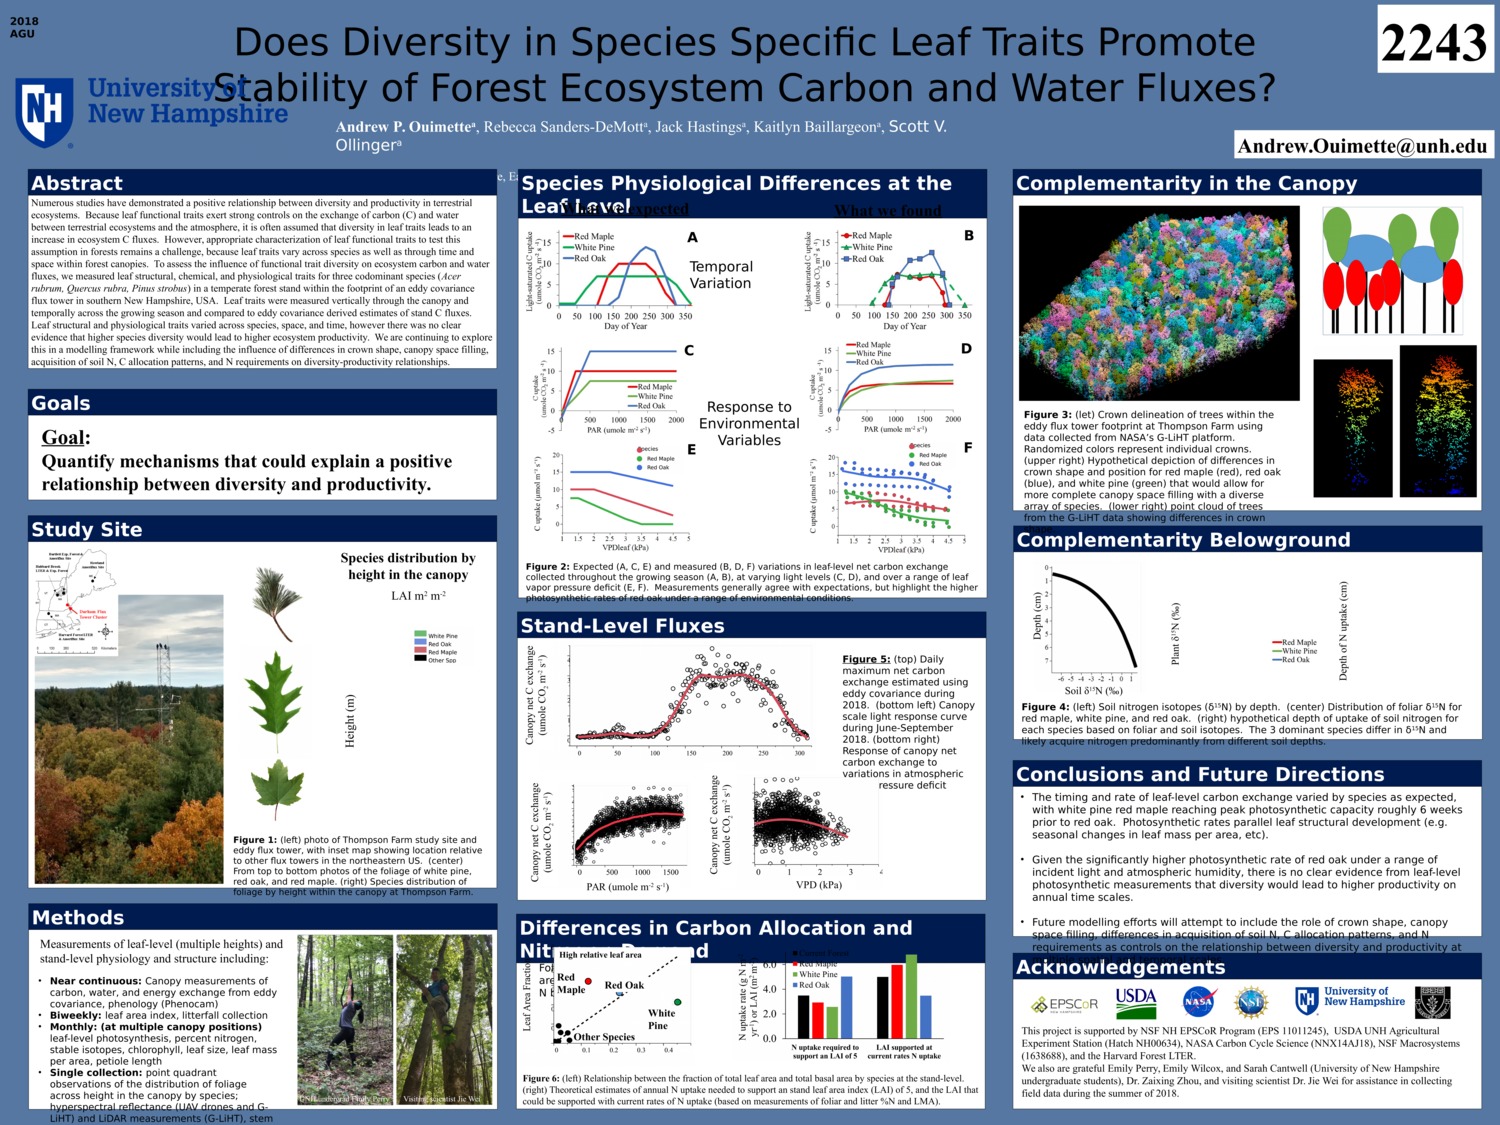 Does Diversity In Species Specific Leaf Traits Promote Stability Of Forest Ecosystem Carbon And Water Fluxes? by aouimette